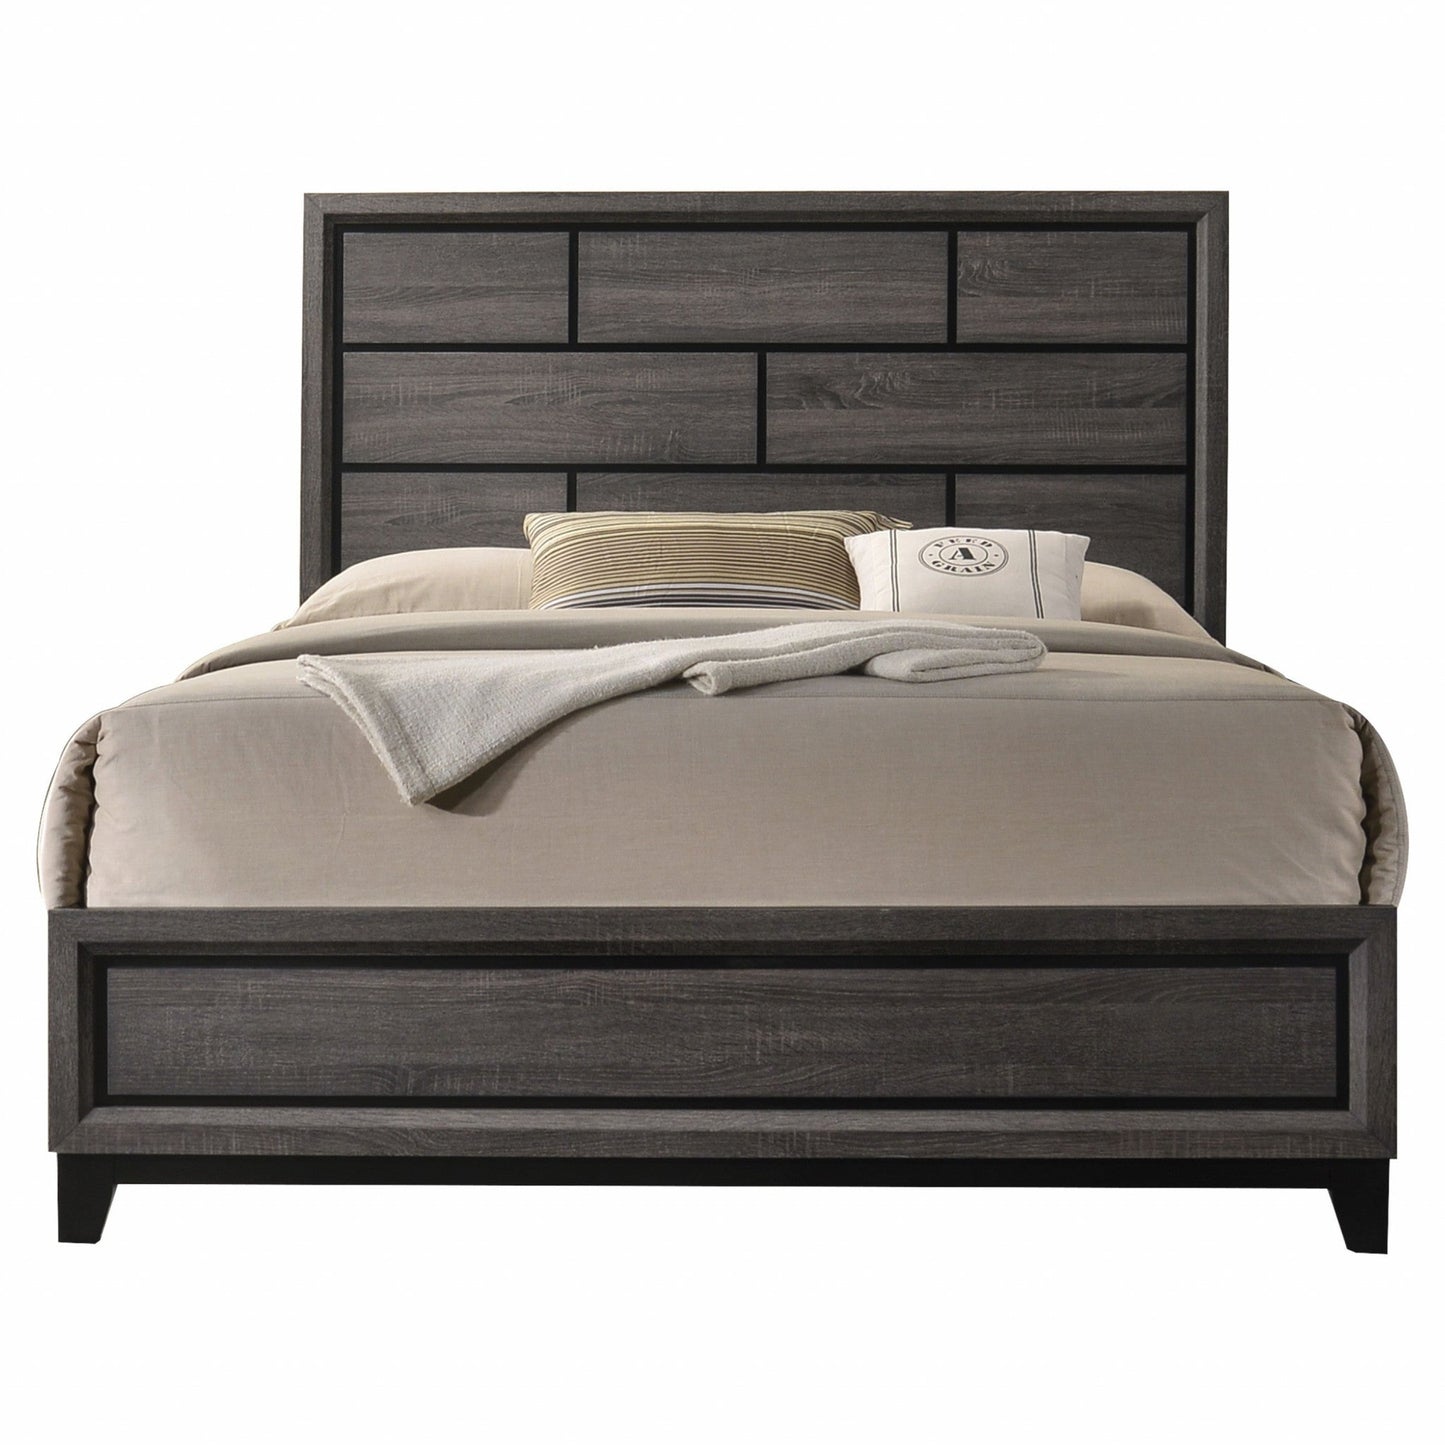 86inches X 79inches X 56inches Weathered Gray Eastern King Bed